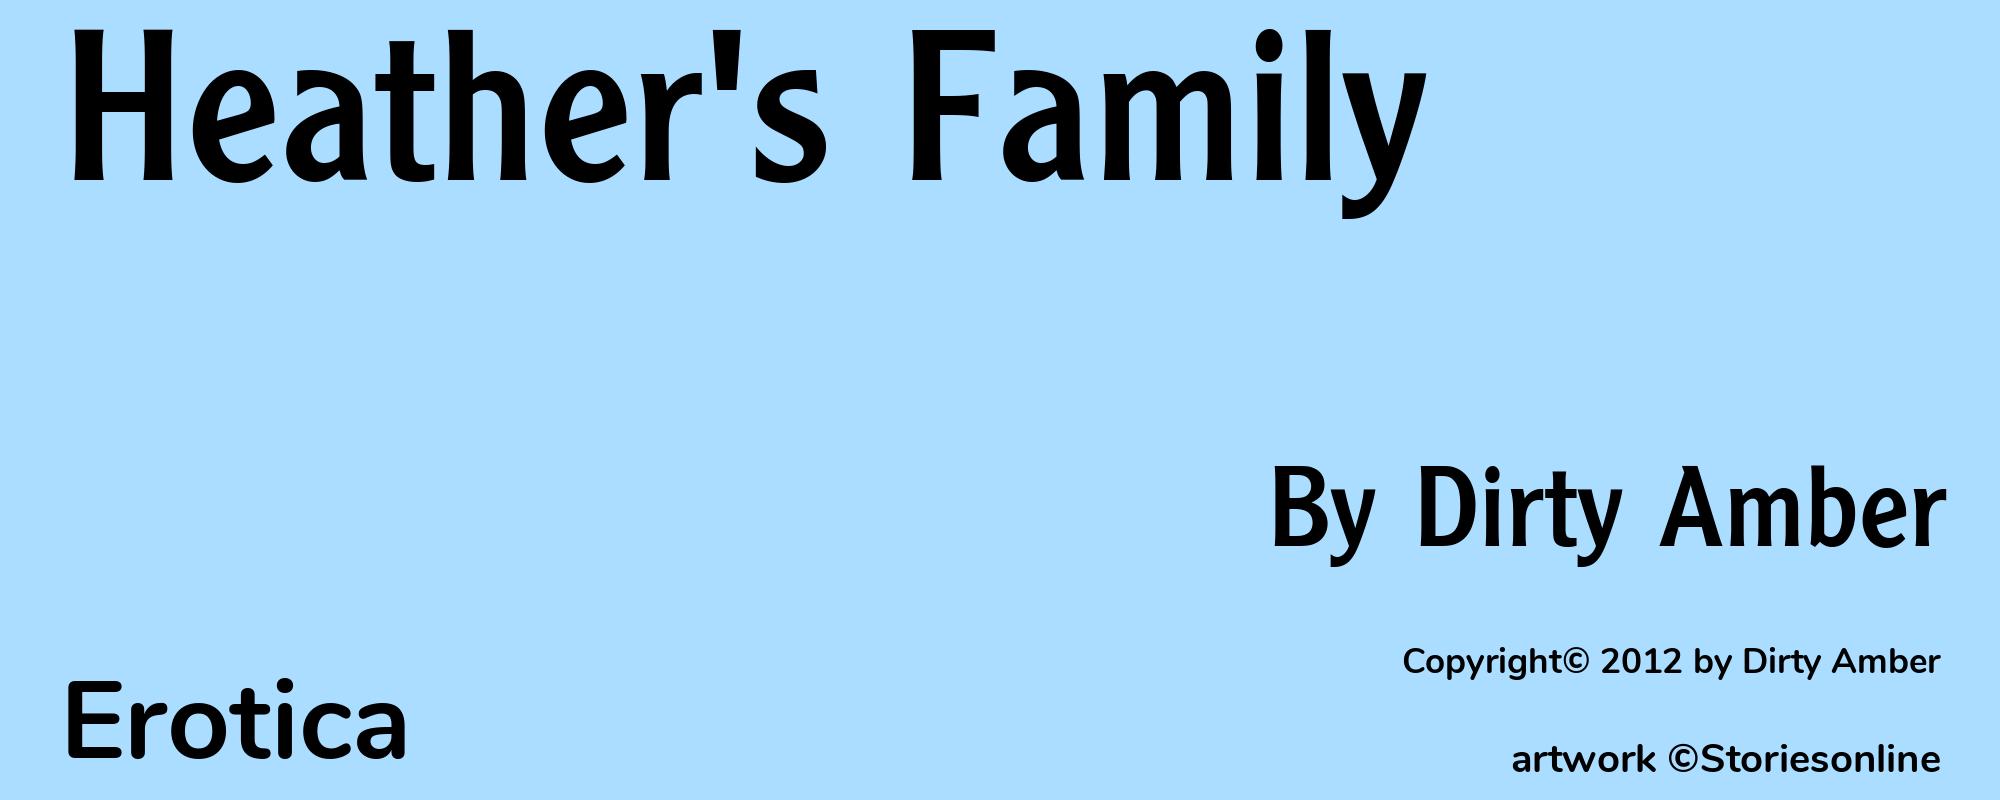 Heather's Family - Cover